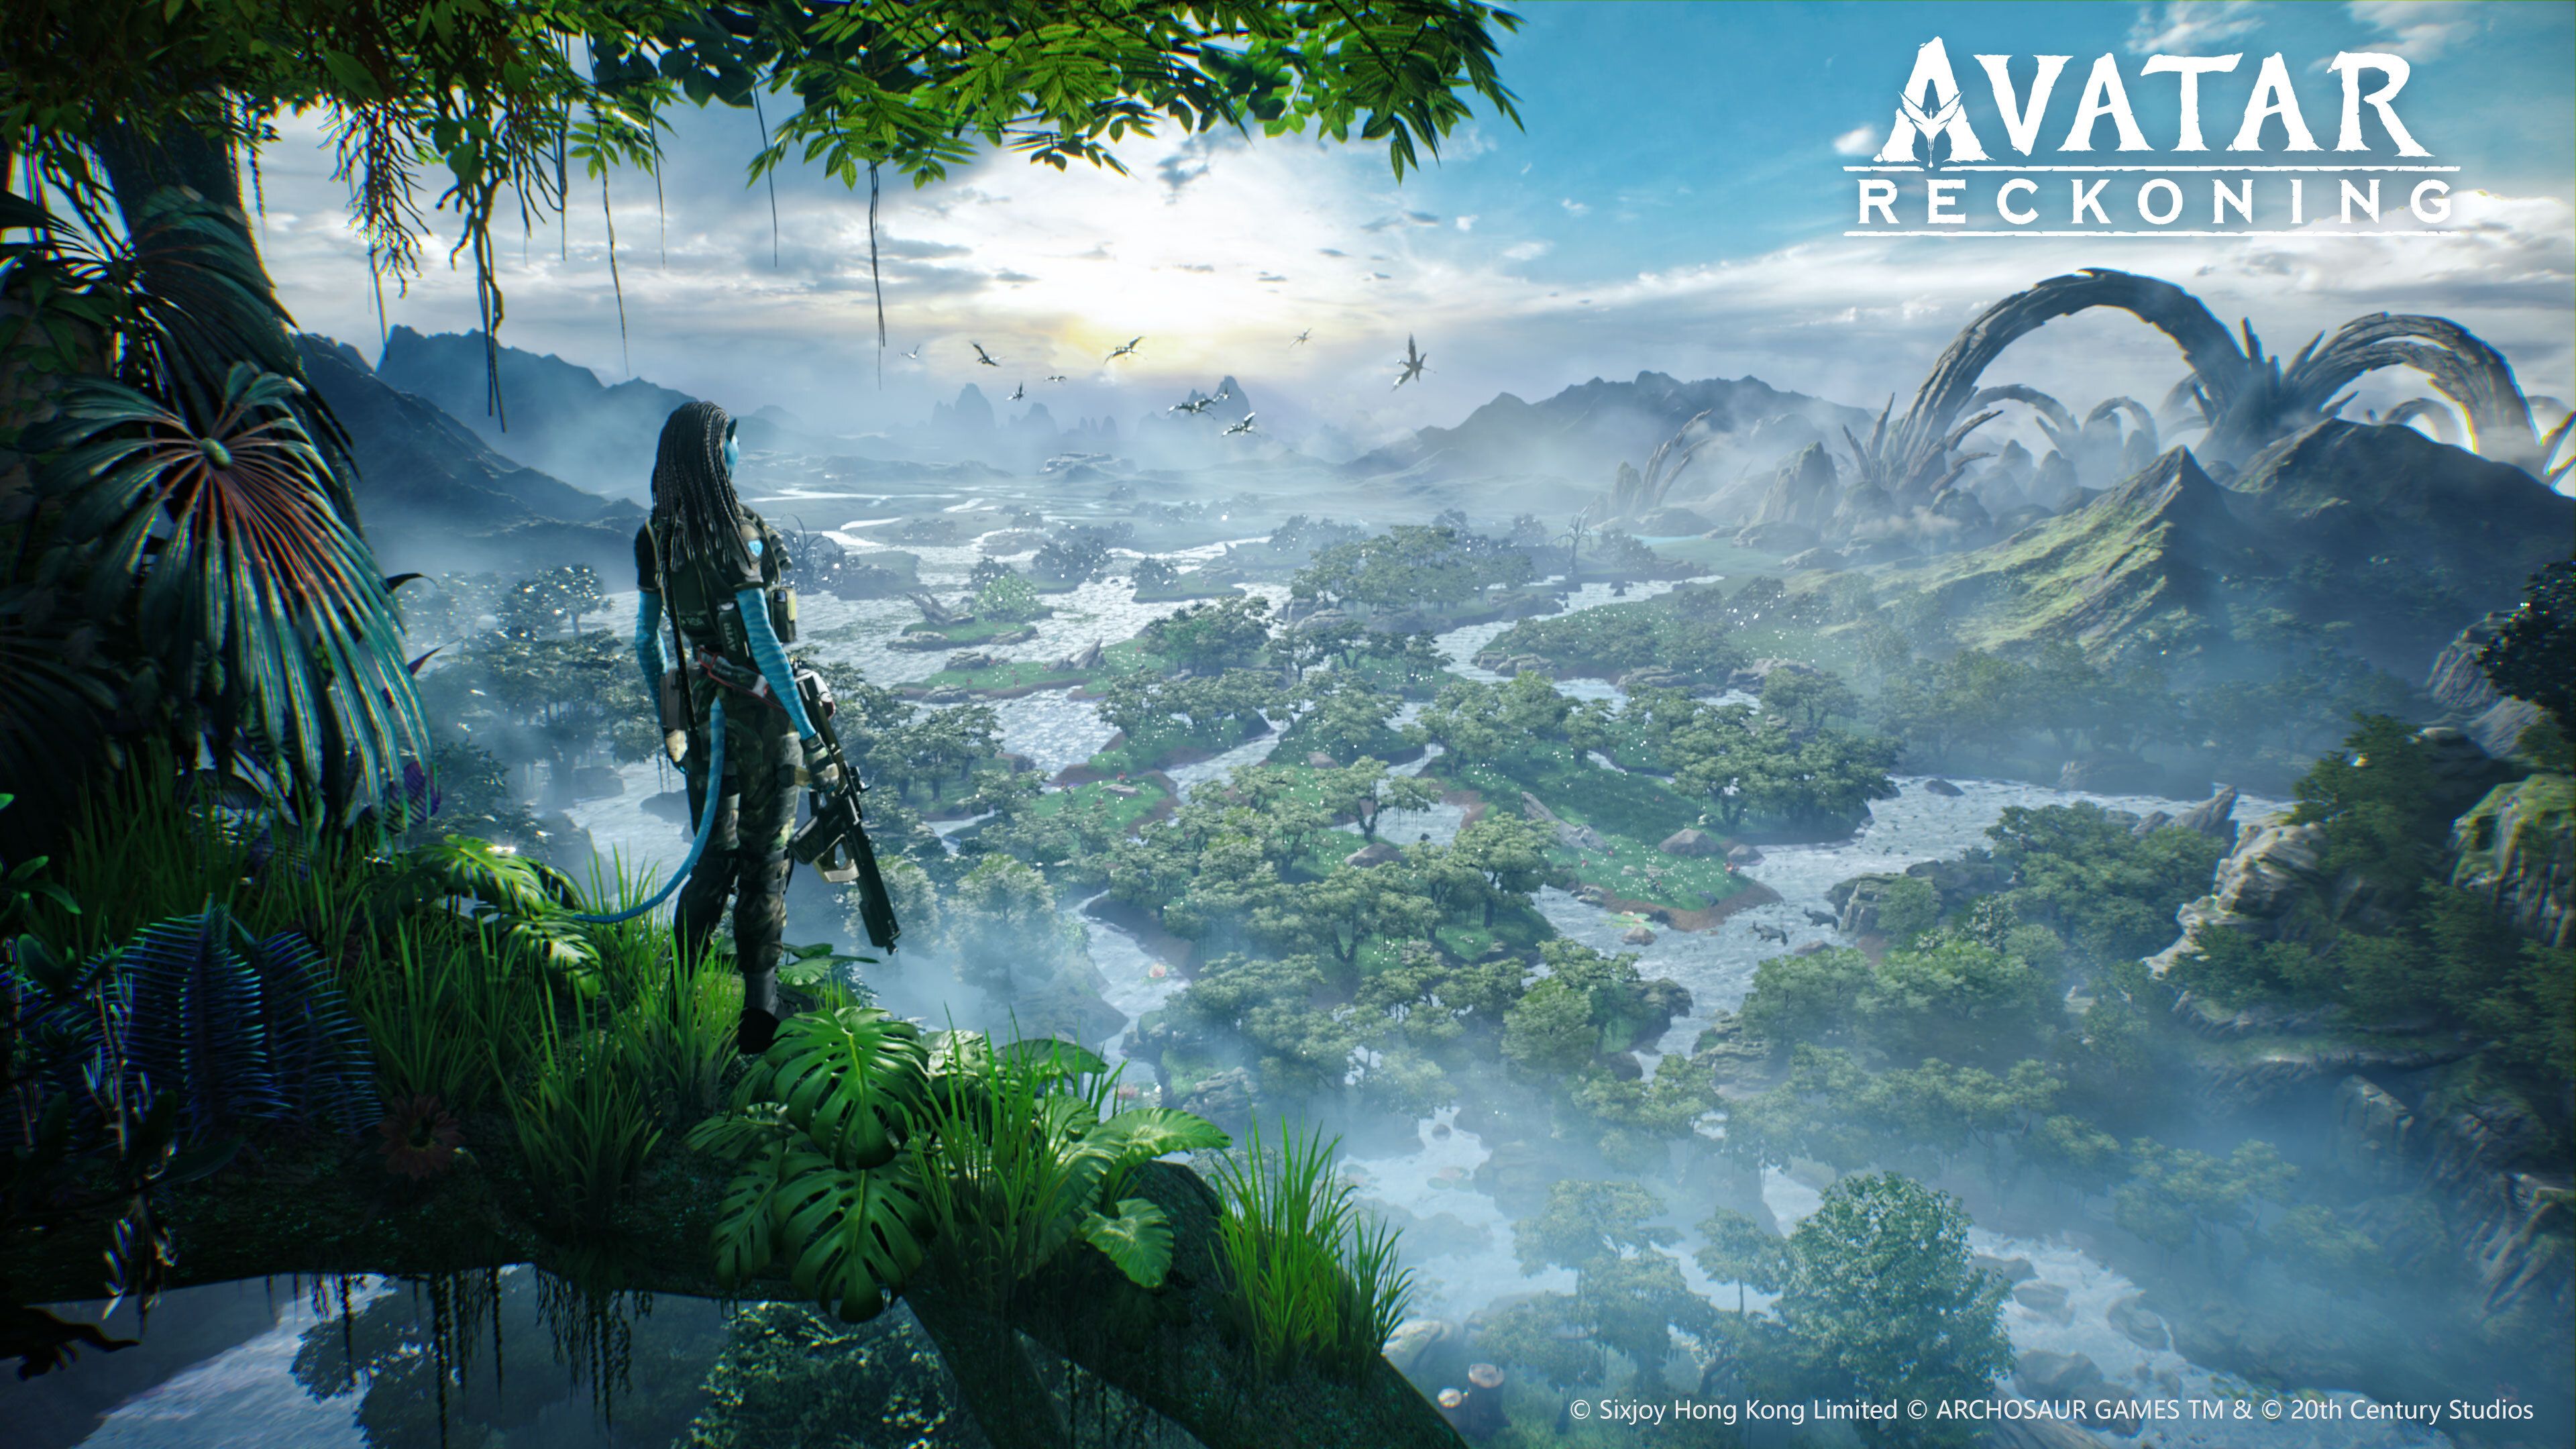 Avatar: Reckoning key art shows a Na’vi looking out over the lush world of Pandora.